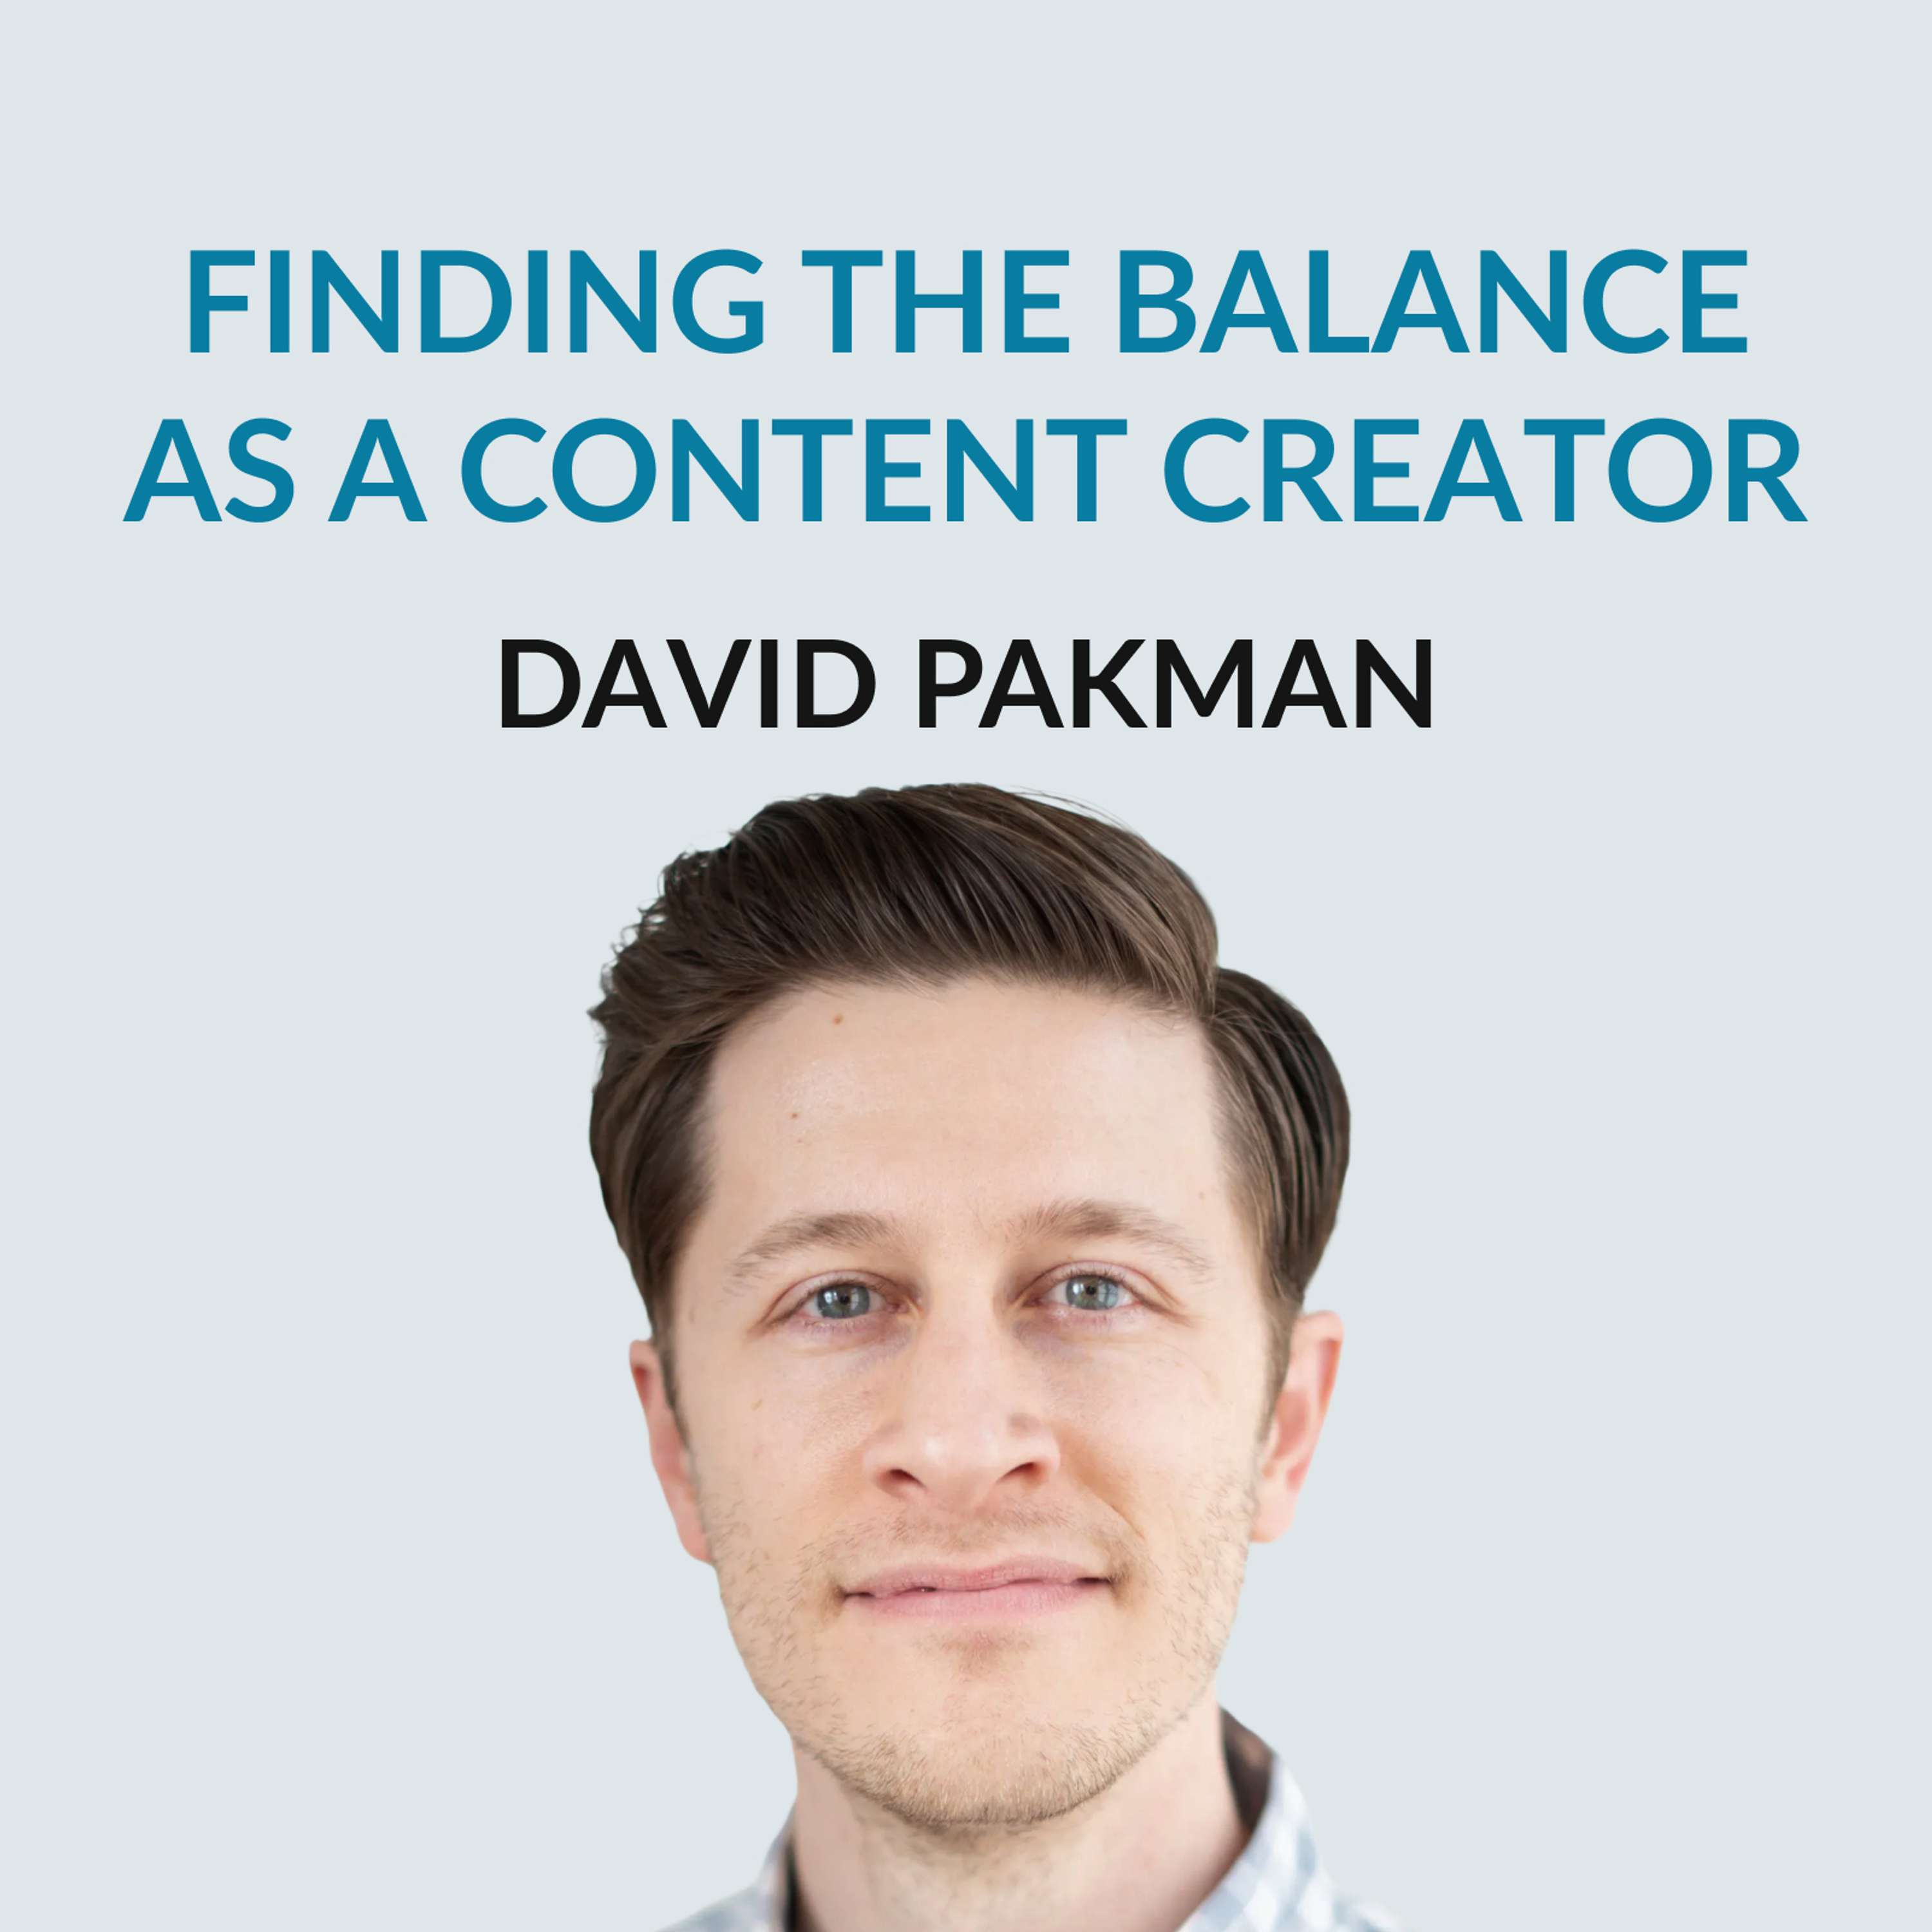 #169 "2M Subscribers, I love what I do, should I take a break?" — David Pakman on finding good work early, , how money and motivation changed over time, finding a balance in content creation, life after YouTube, his doubts about taking a sabbatical, having a daughter, dealing with public recognition and hateful comments, the lack of role models